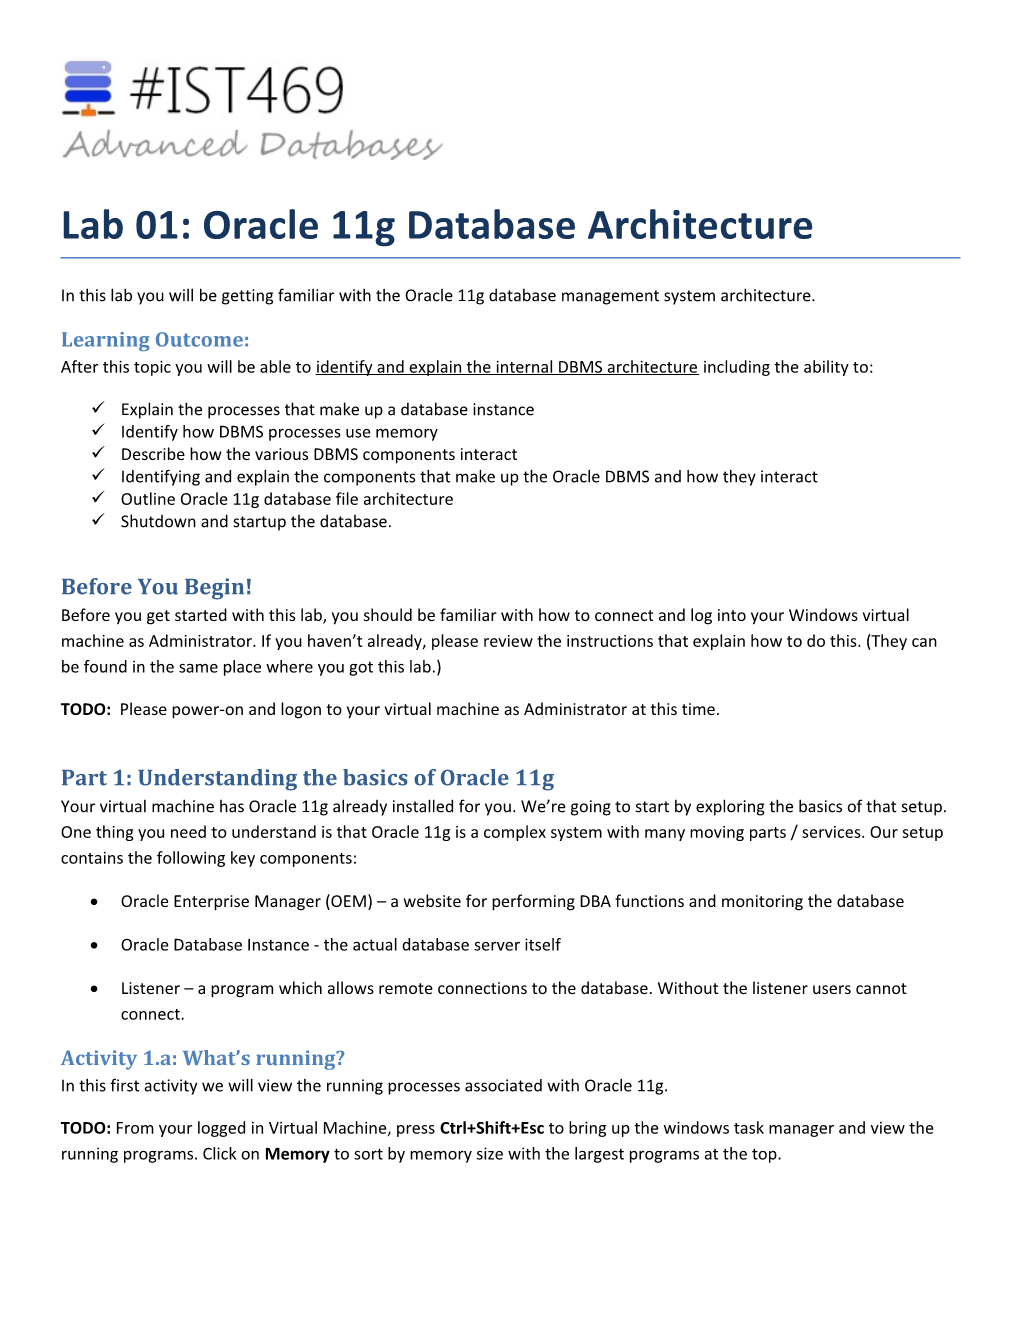 Oracle 11G Database Arch